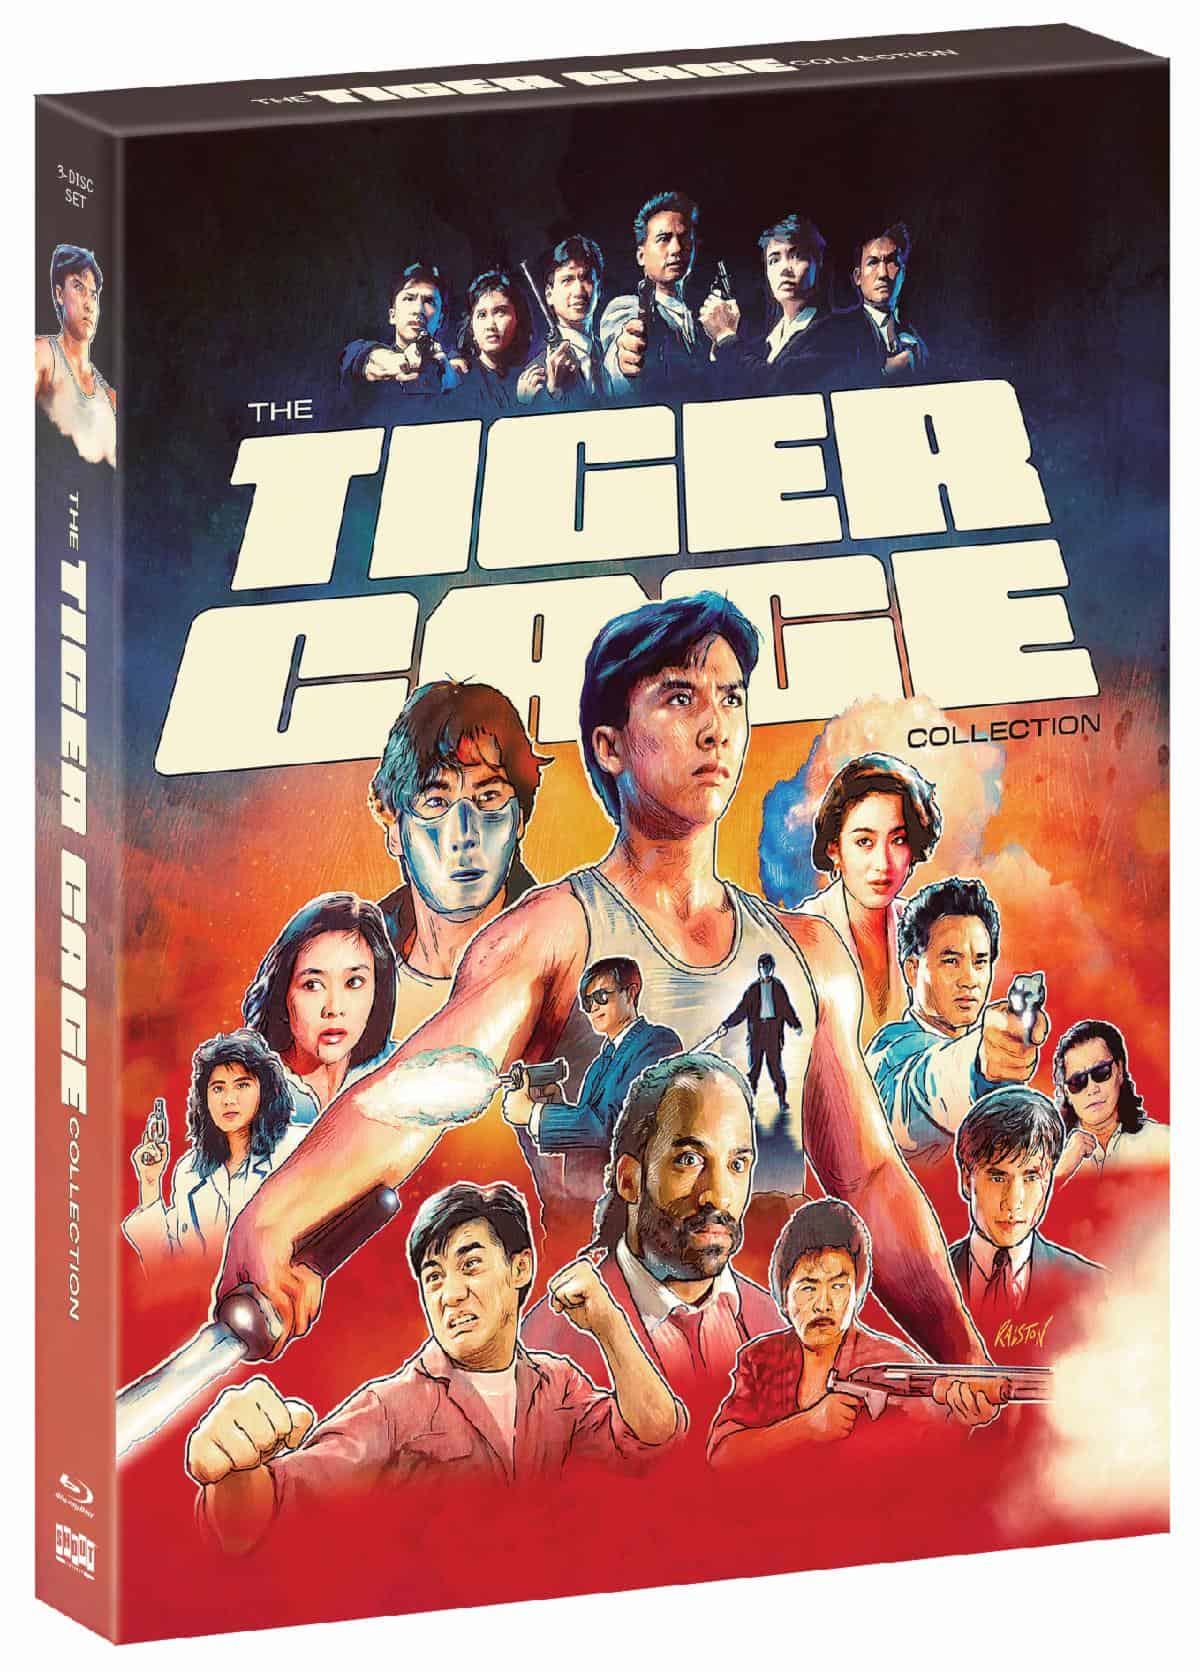 The Tiger Cage Collection hits Blu-ray on May 9th from Shout! 19